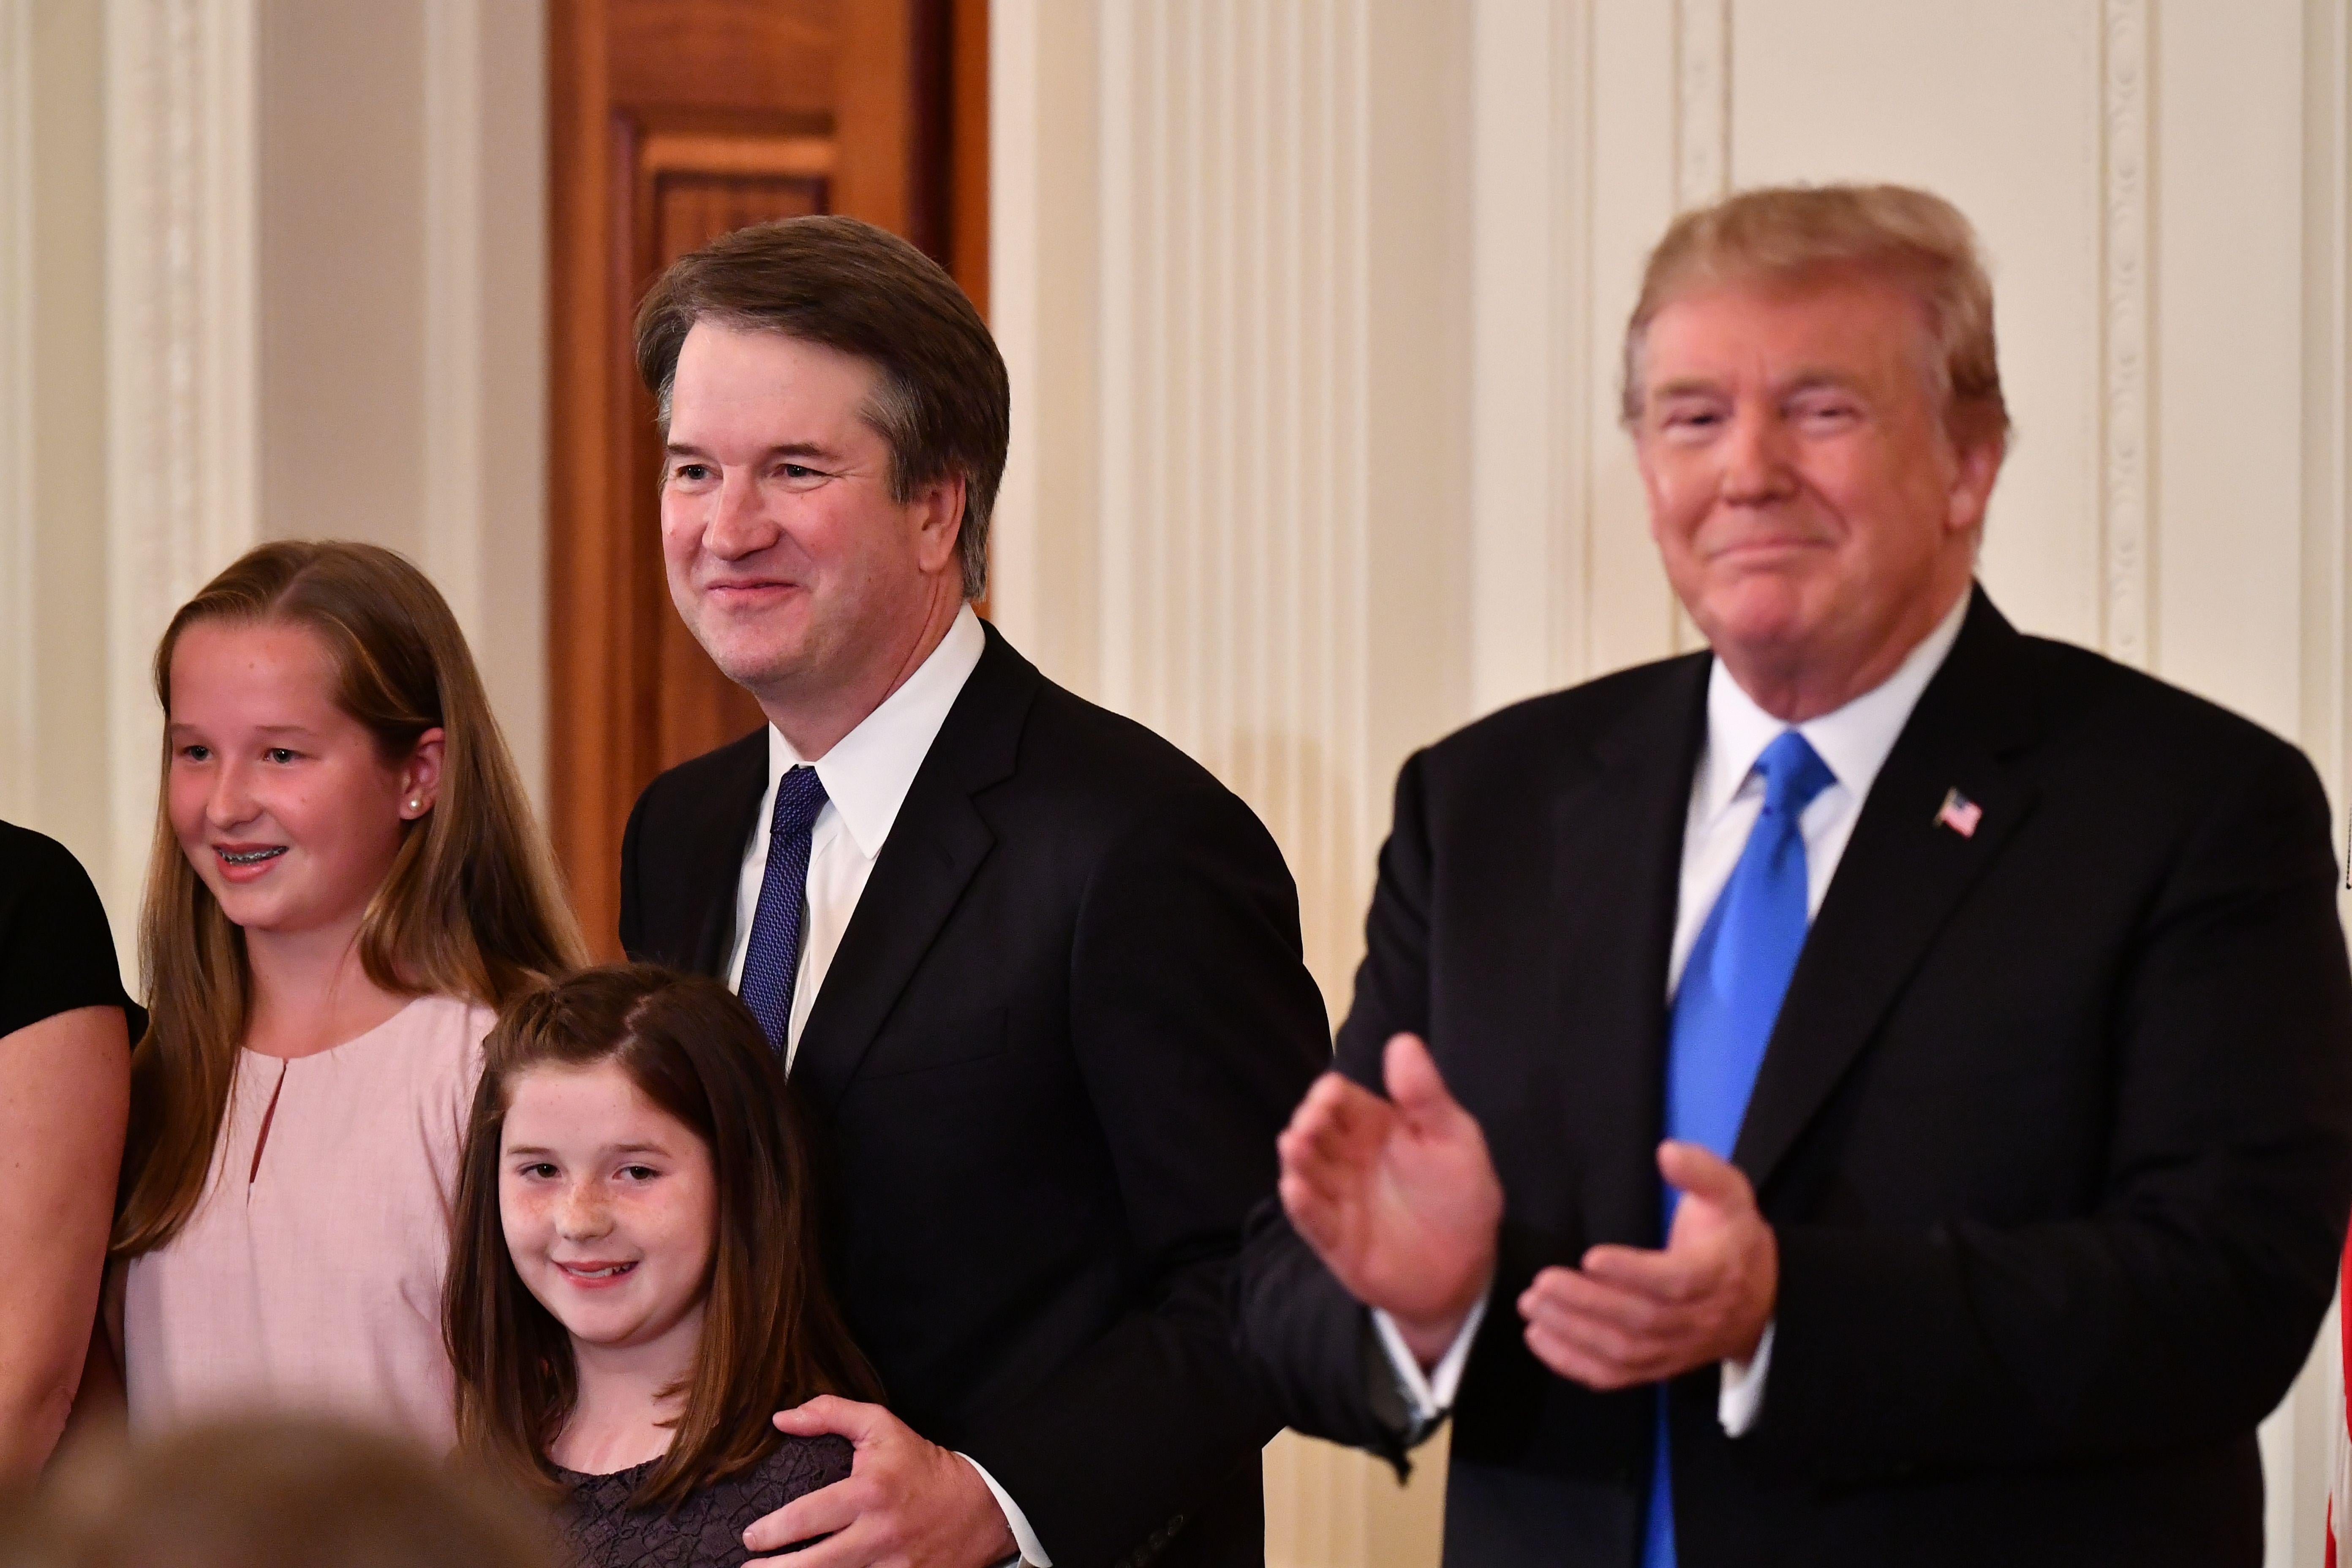 Supreme Court nominee Brett Kavanaugh, his wife Ashley Estes Kavanaugh (off frame) and their two daughters stand by President Donald Trump after he announced his nomination in the East Room of the White House on July 9, 2018.